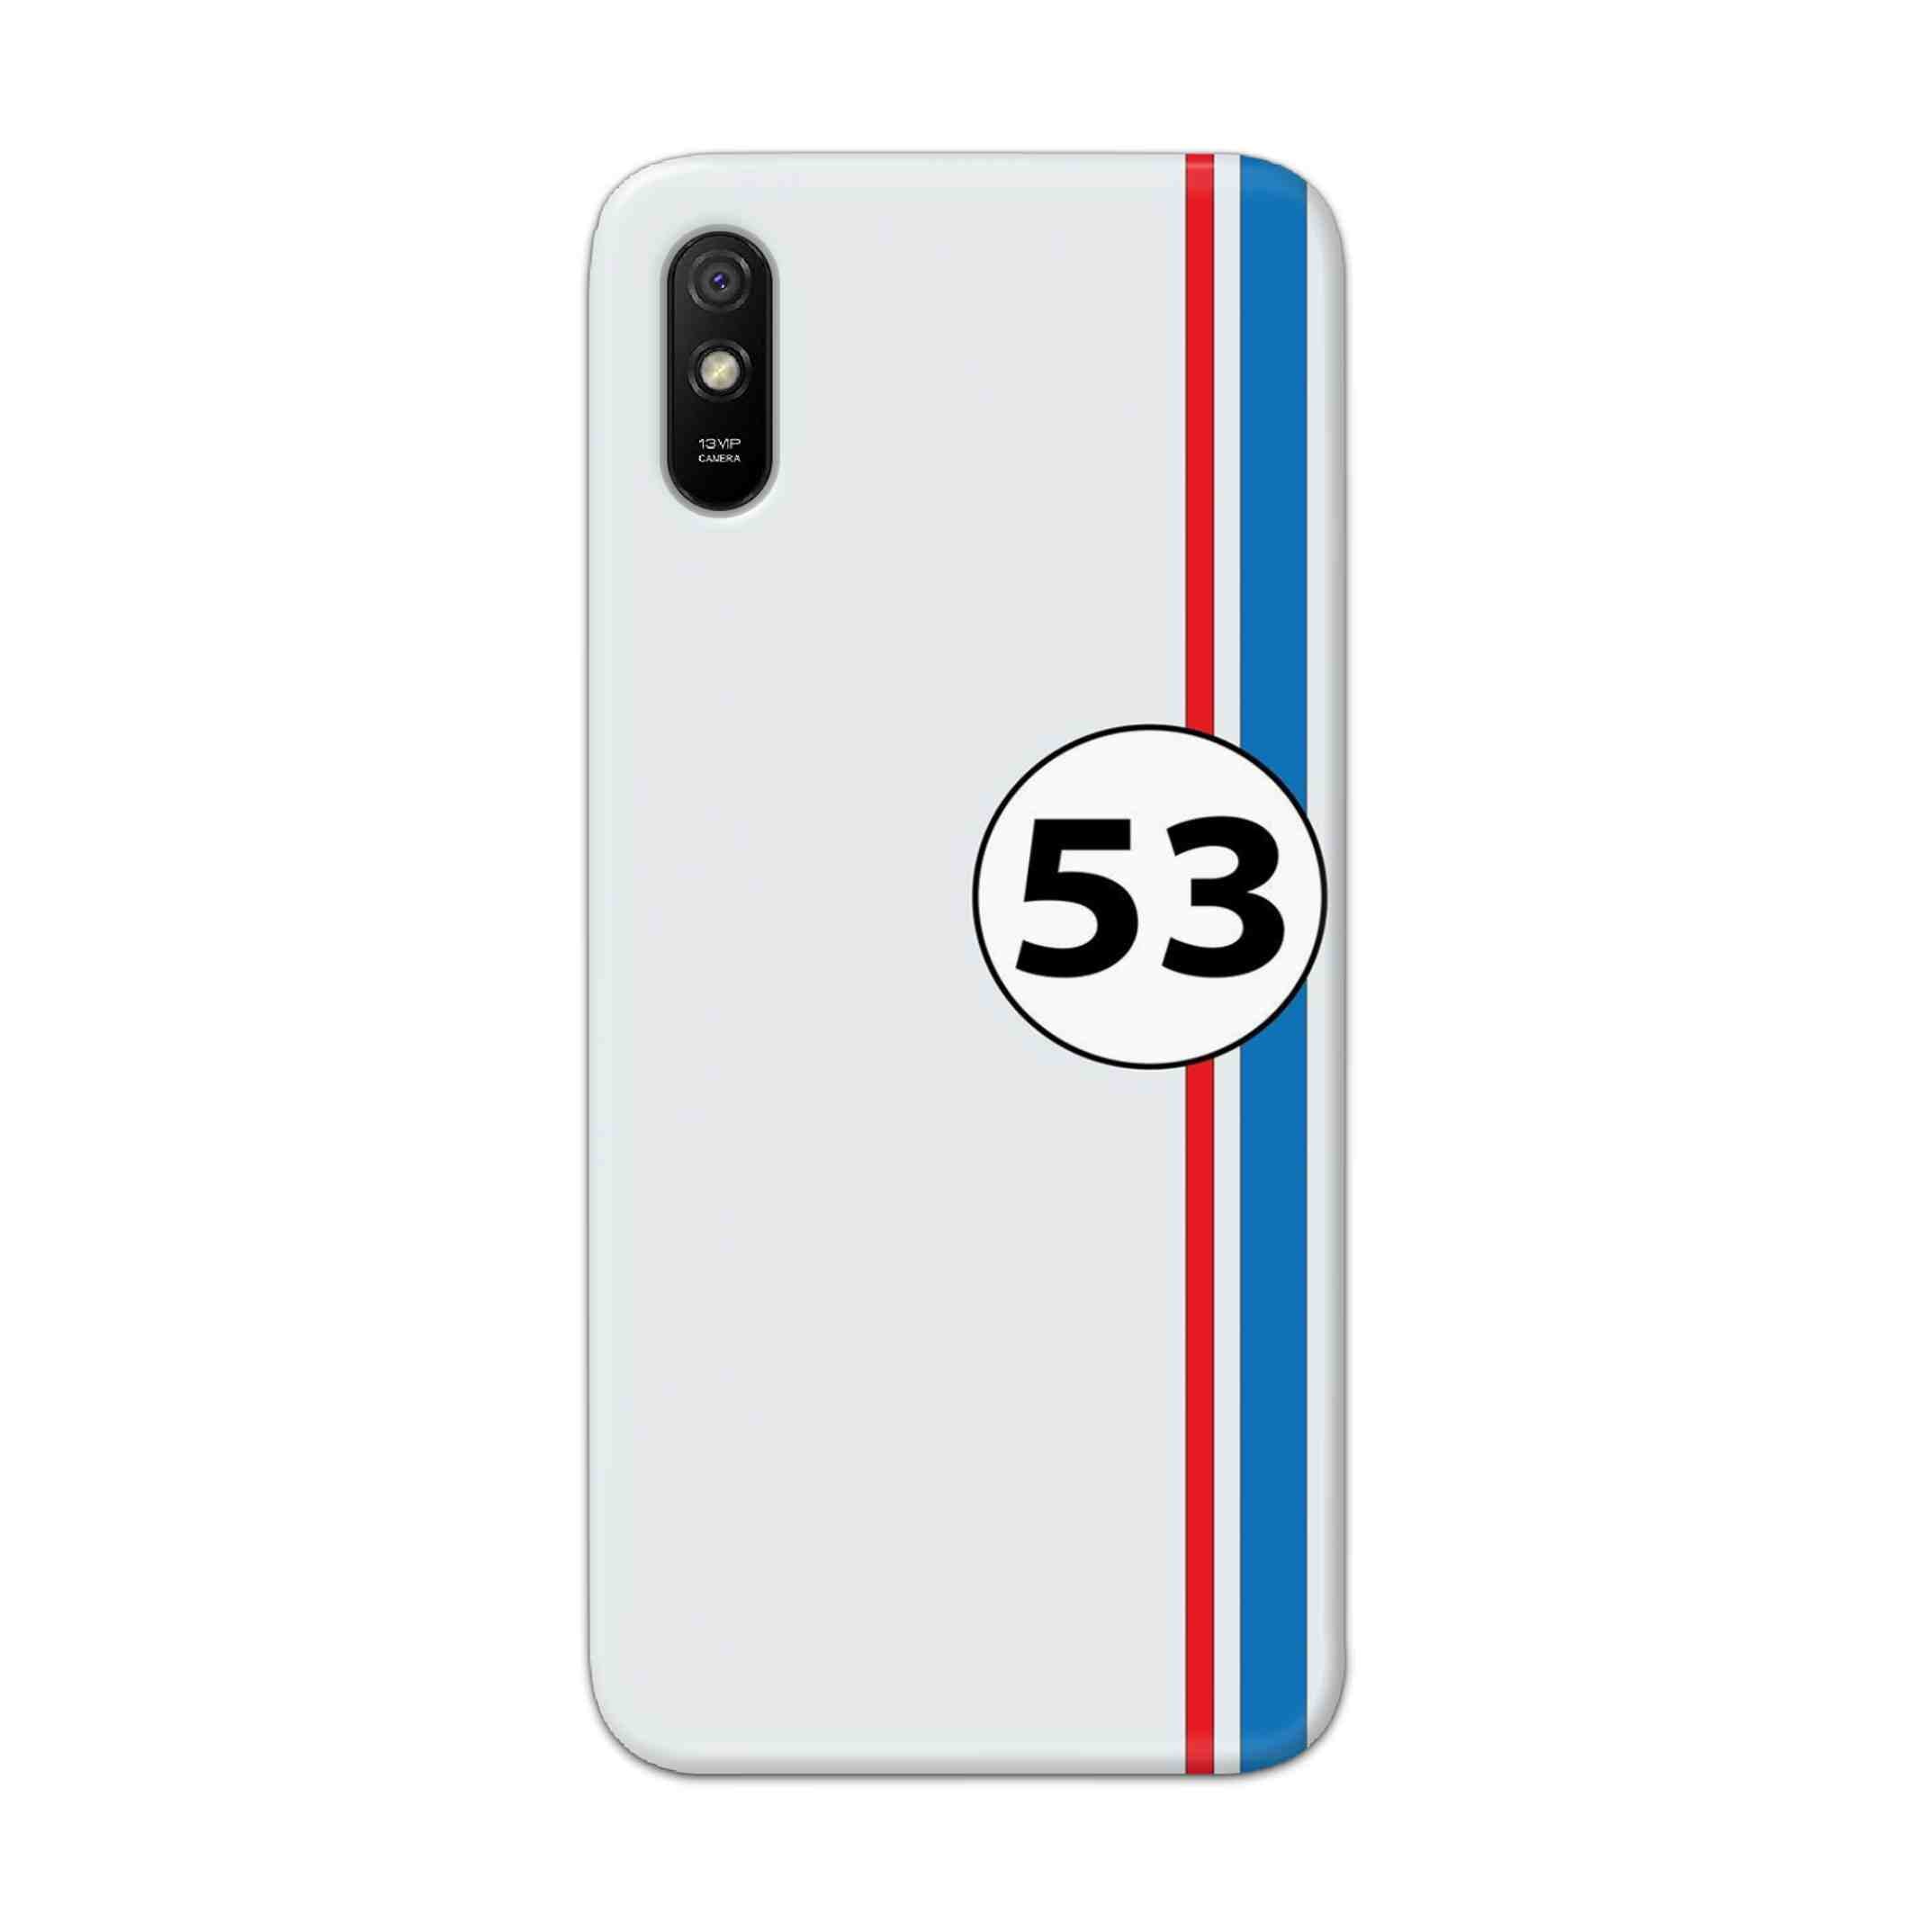 Buy 53 Hard Back Mobile Phone Case Cover For Redmi 9A Online